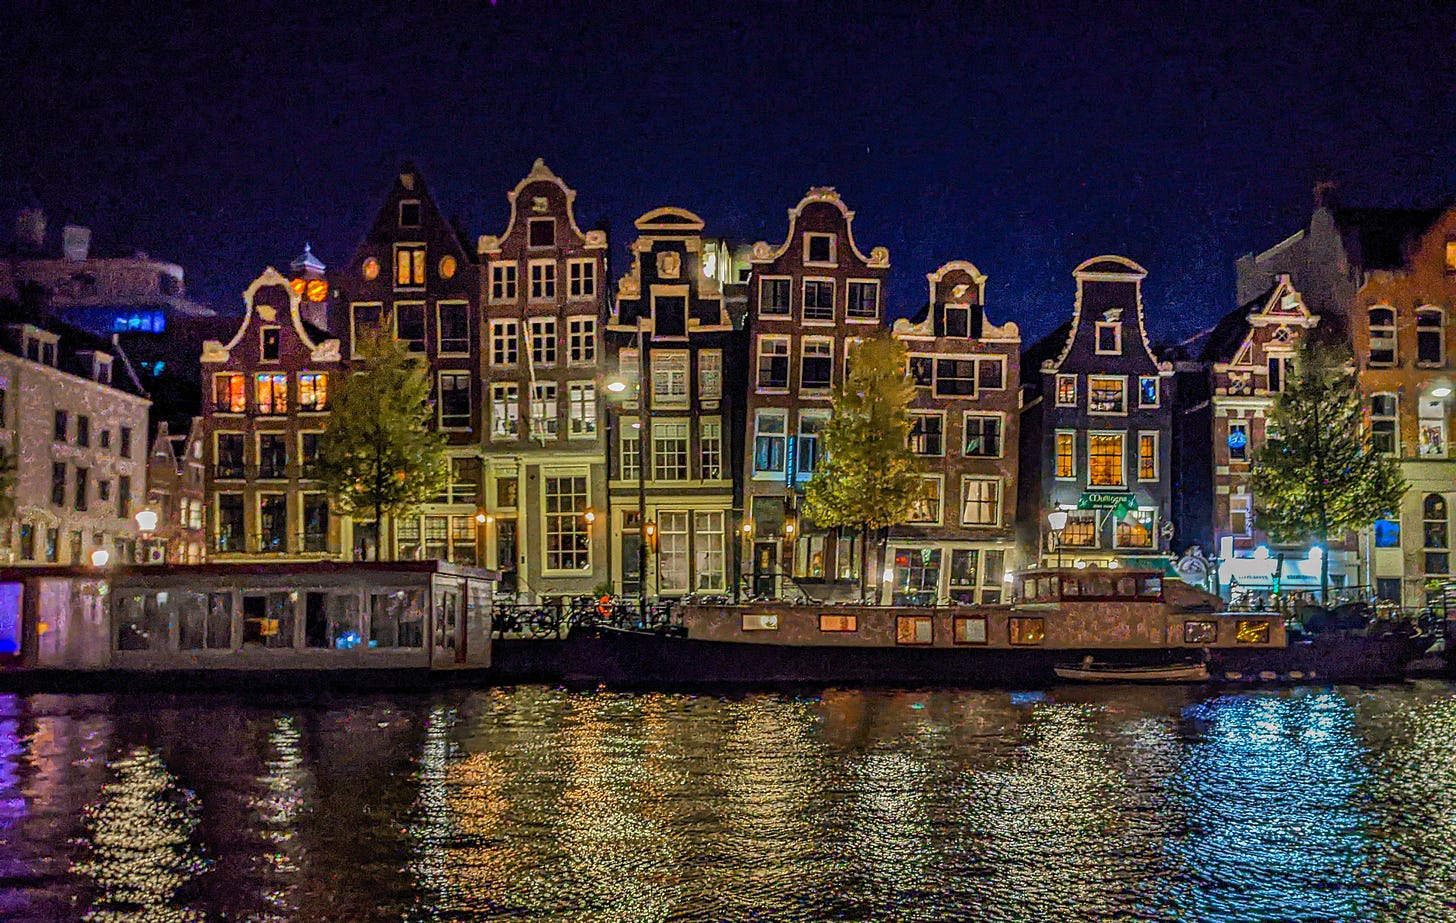 Amsterdam's drunken sisters, six tilted houses leaning against each other. 